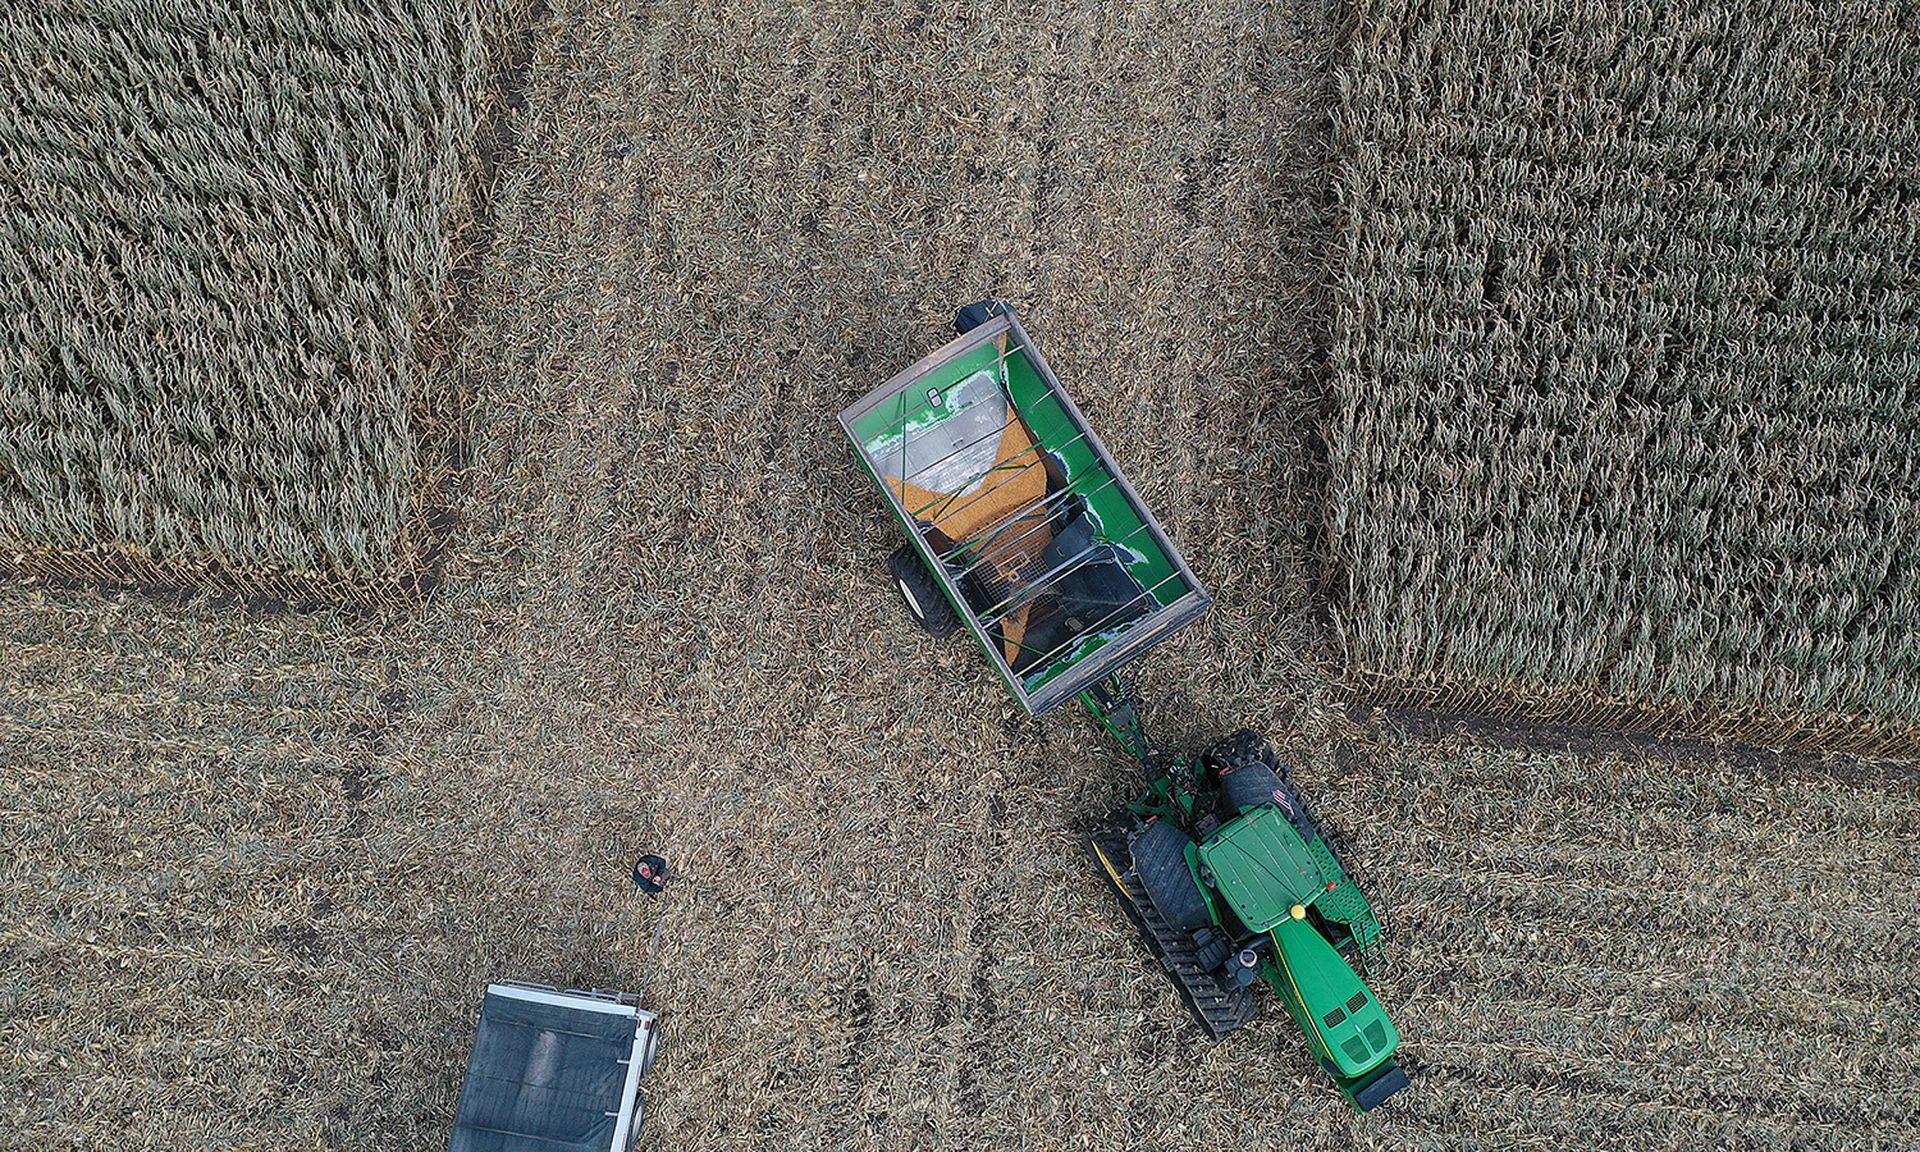 An aerial view from a drone shows a grain cart being used during the corn harvest in a field at the Hansen Family Farms on Oct. 12, 2019, in Baxter, Iowa. (Photo by Joe Raedle/Getty Images)